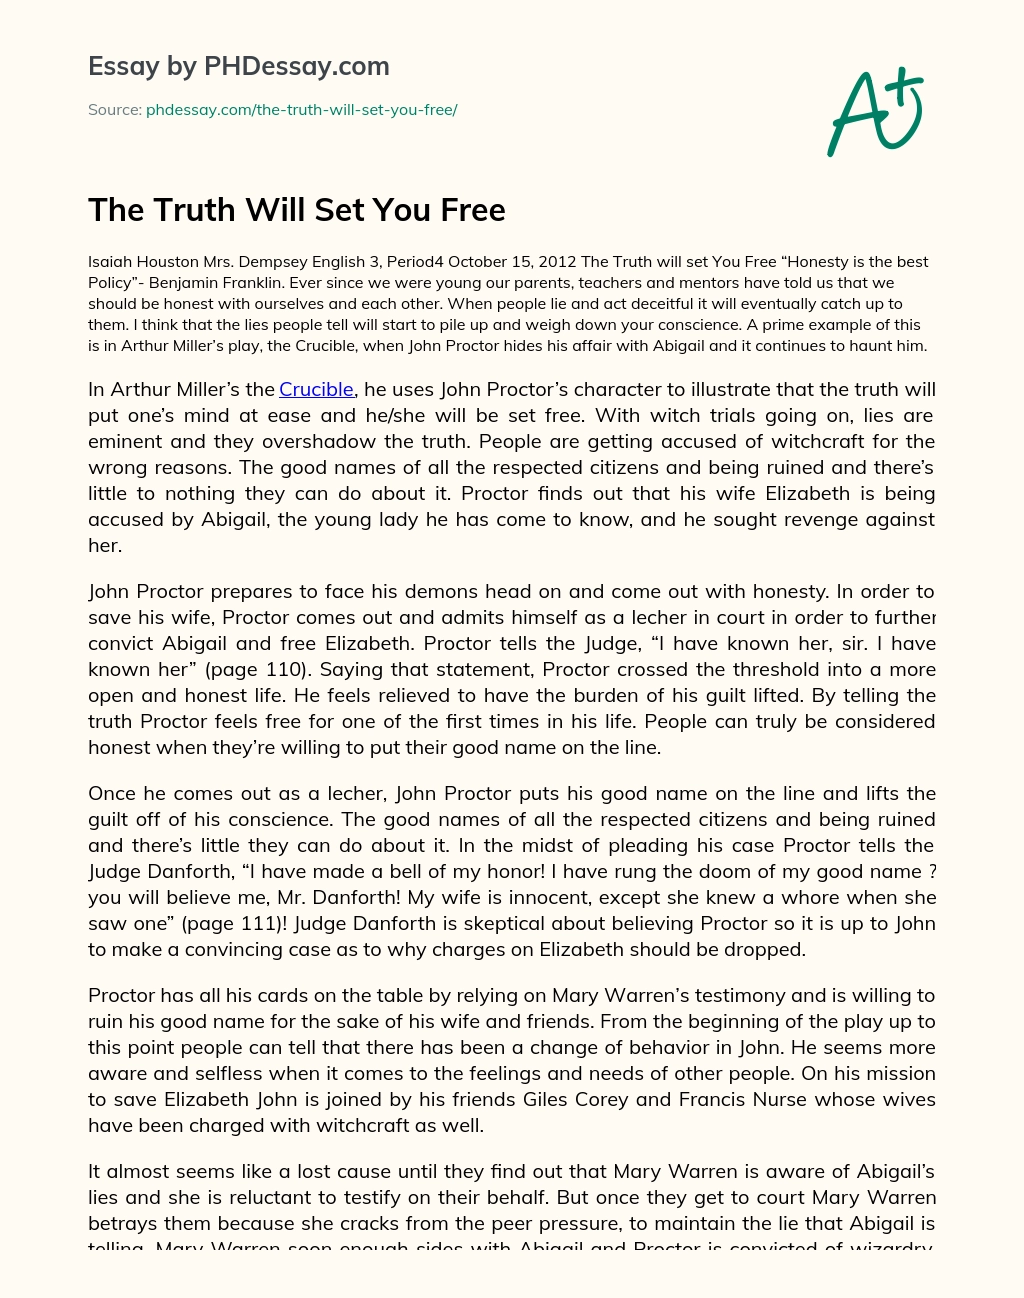 the truth will set you free essay